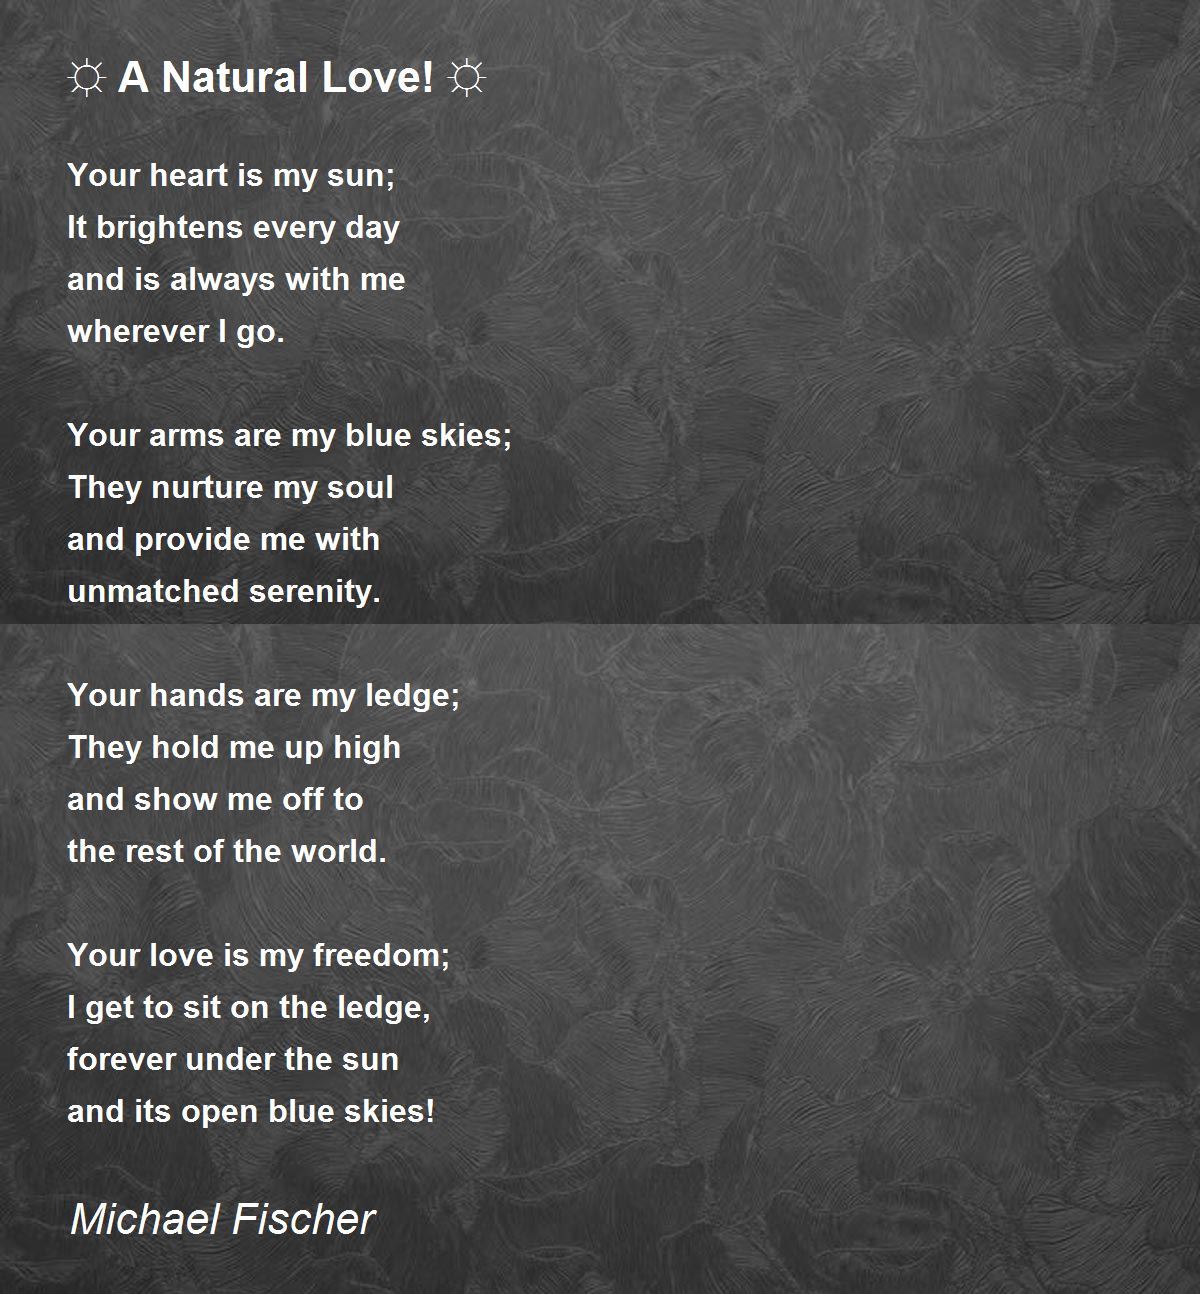 ☼ A Love! ☼ - ☼ A Natural Love! ☼ Poem by Michael Fischer